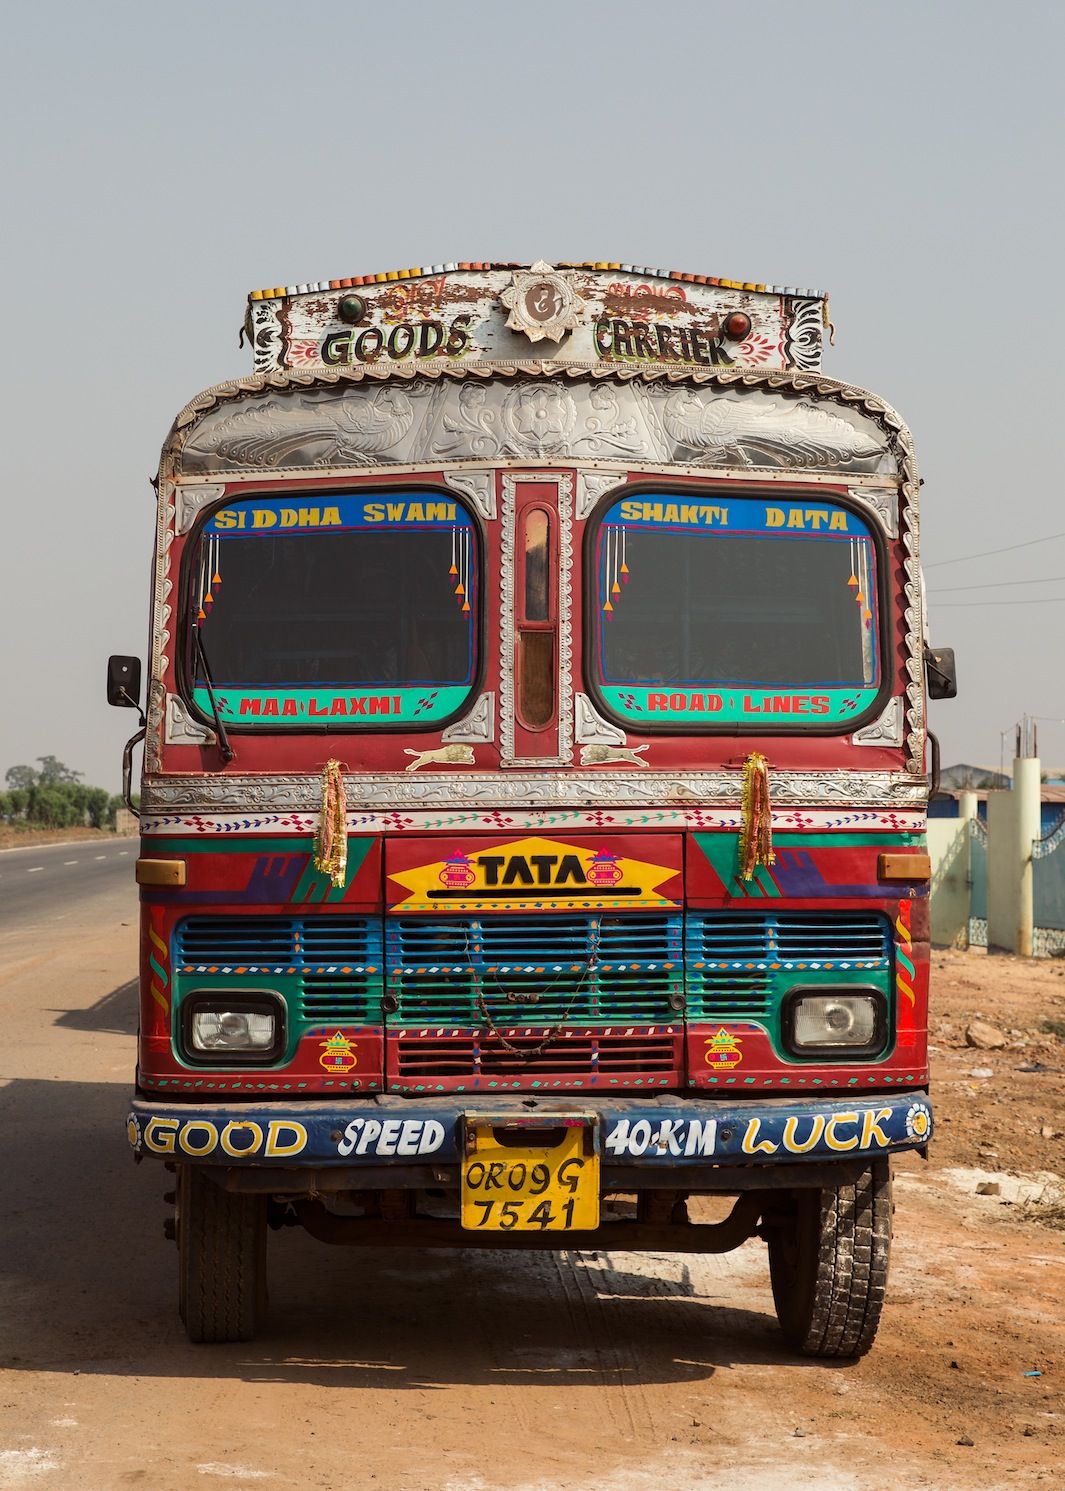 A traditional truck found from India. The truck, along with the truck's art is the inspiration for A Select Few's latest collection.